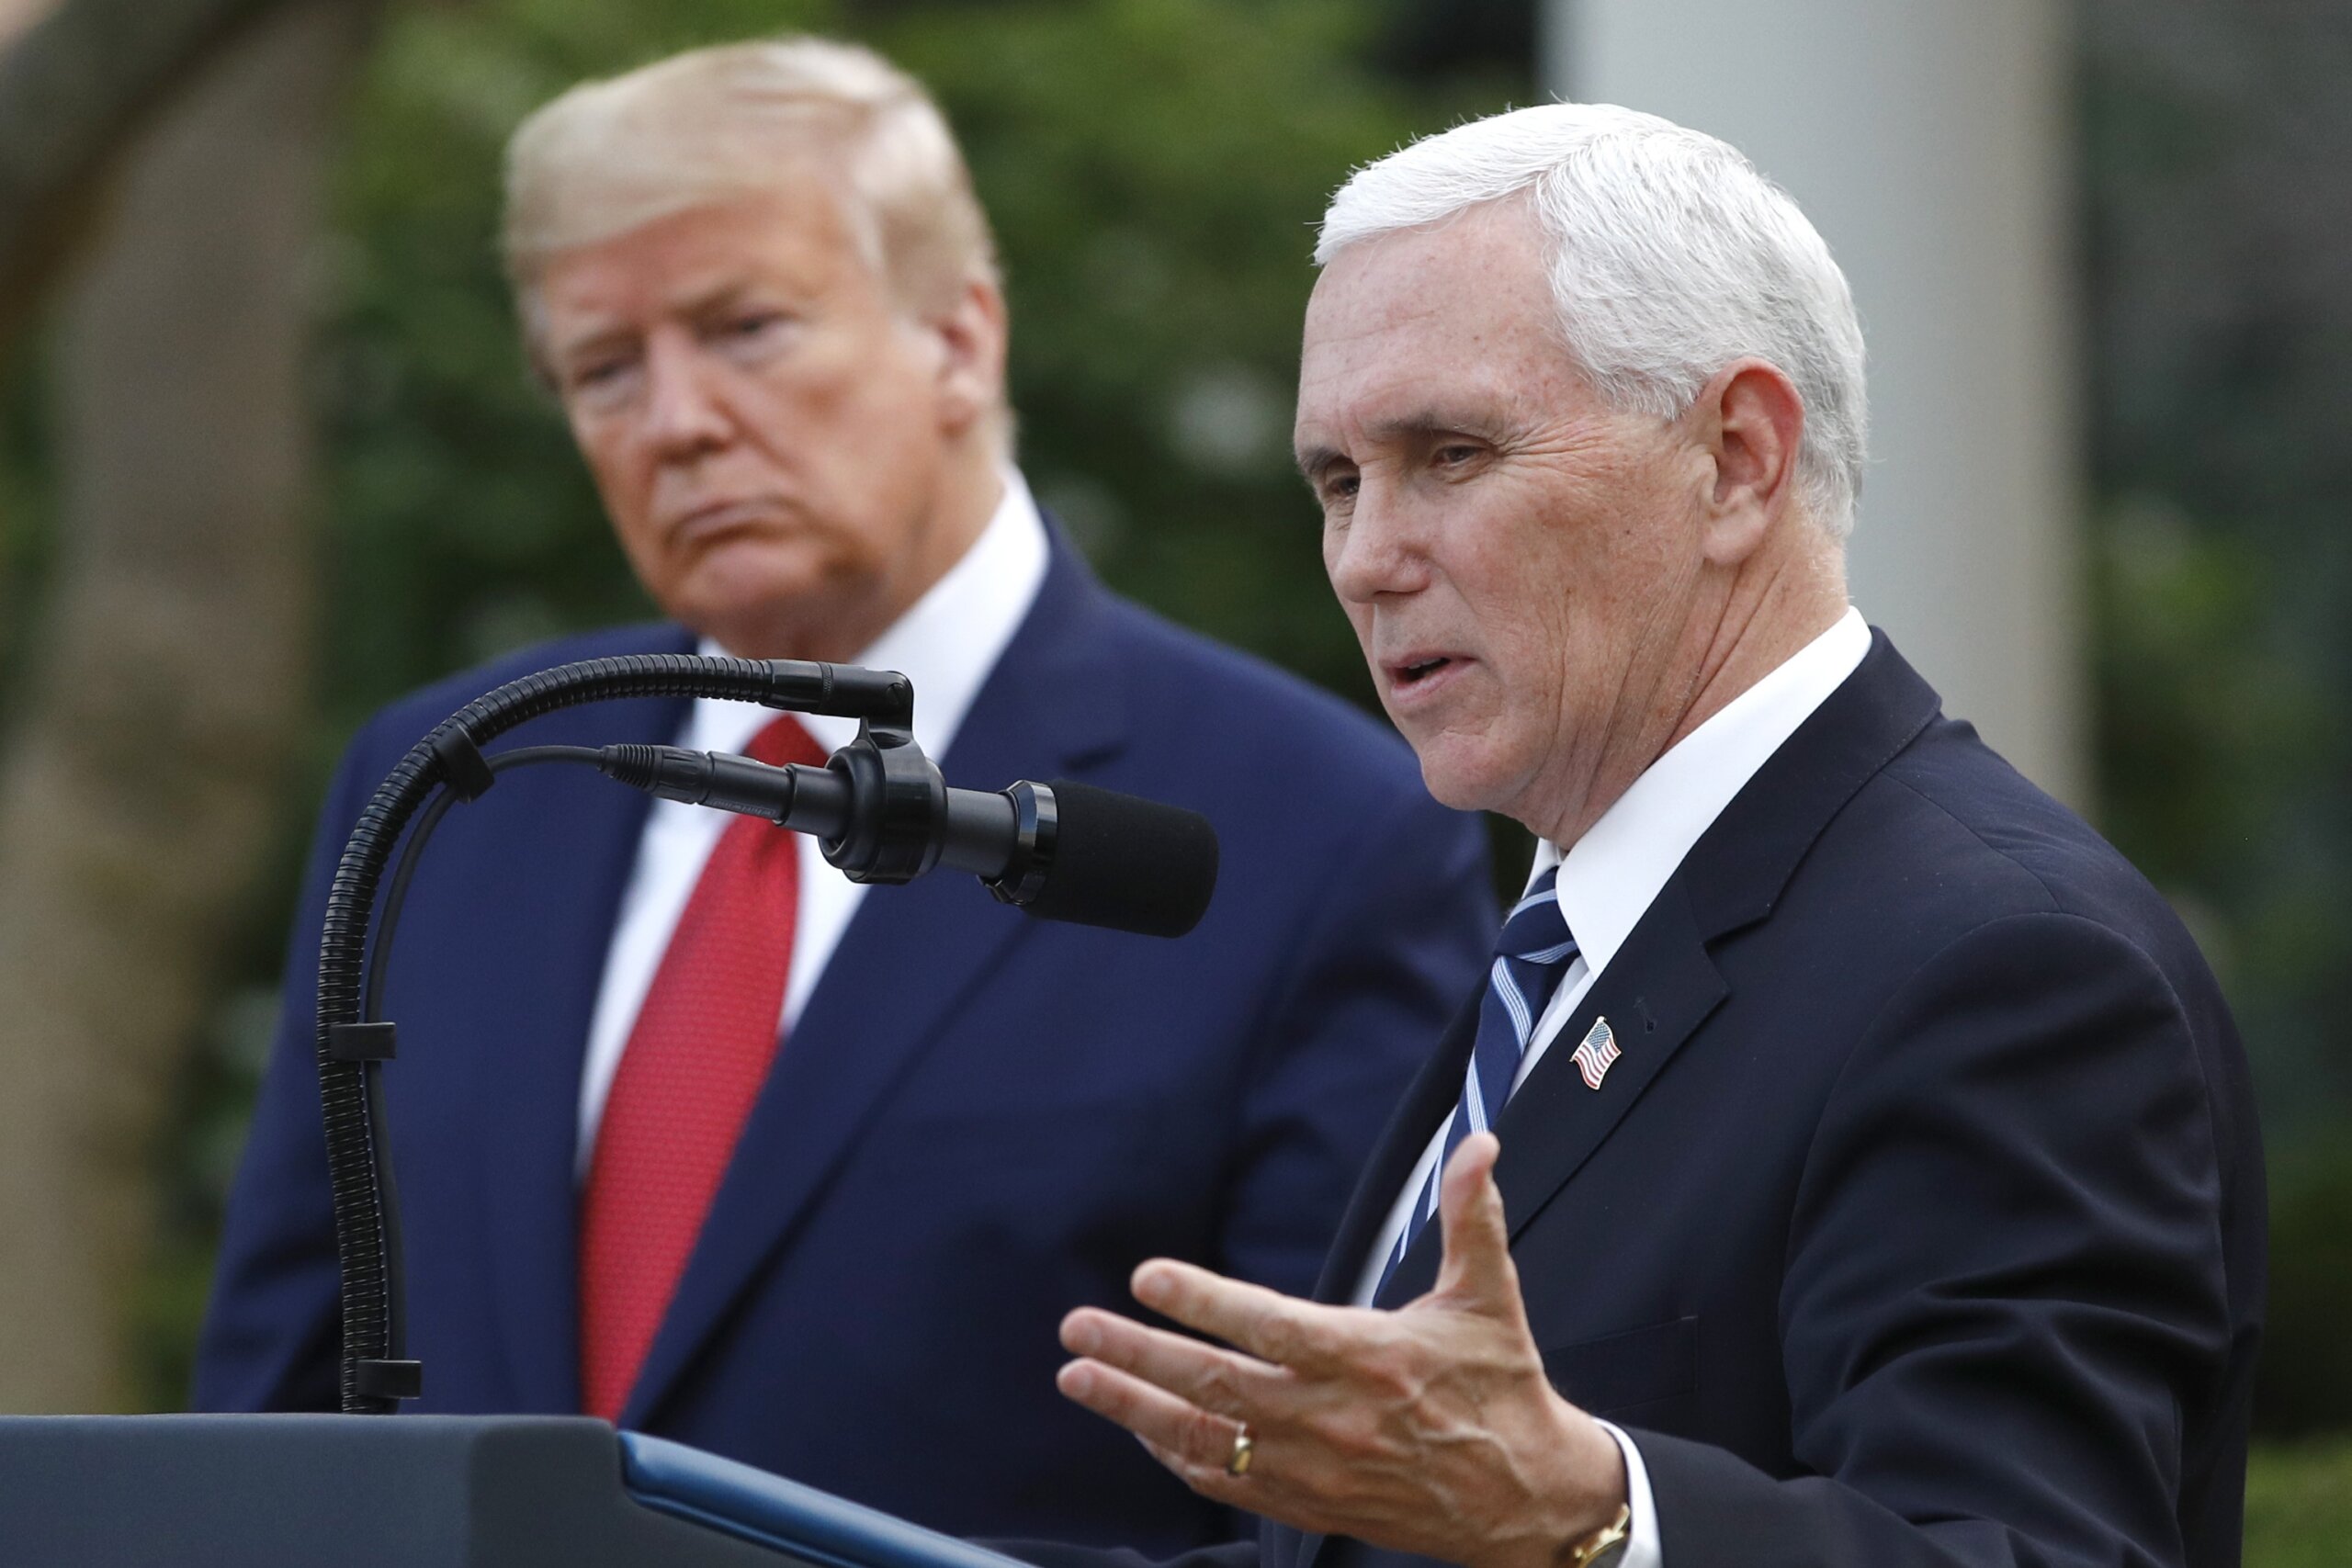 Pence’s early exit from the presidential campaign offers a reminder of Trump’s grip on the GOP